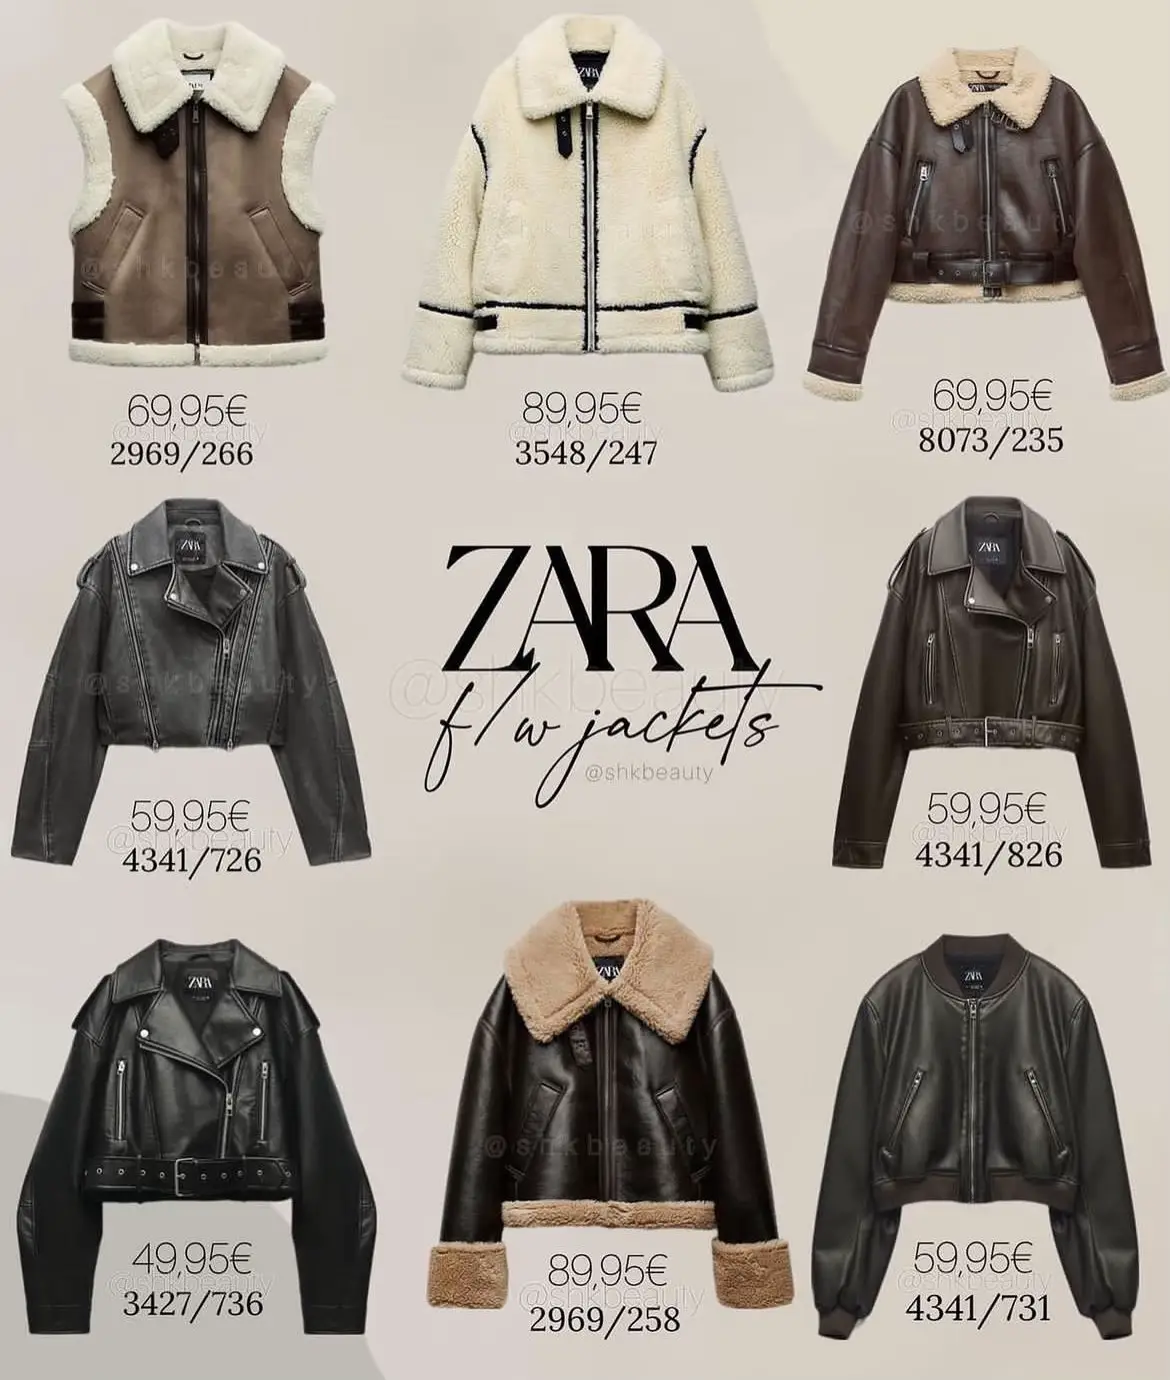 I ordered 2 new jackets for fall from Zara!! 🤎 These 2 jackets